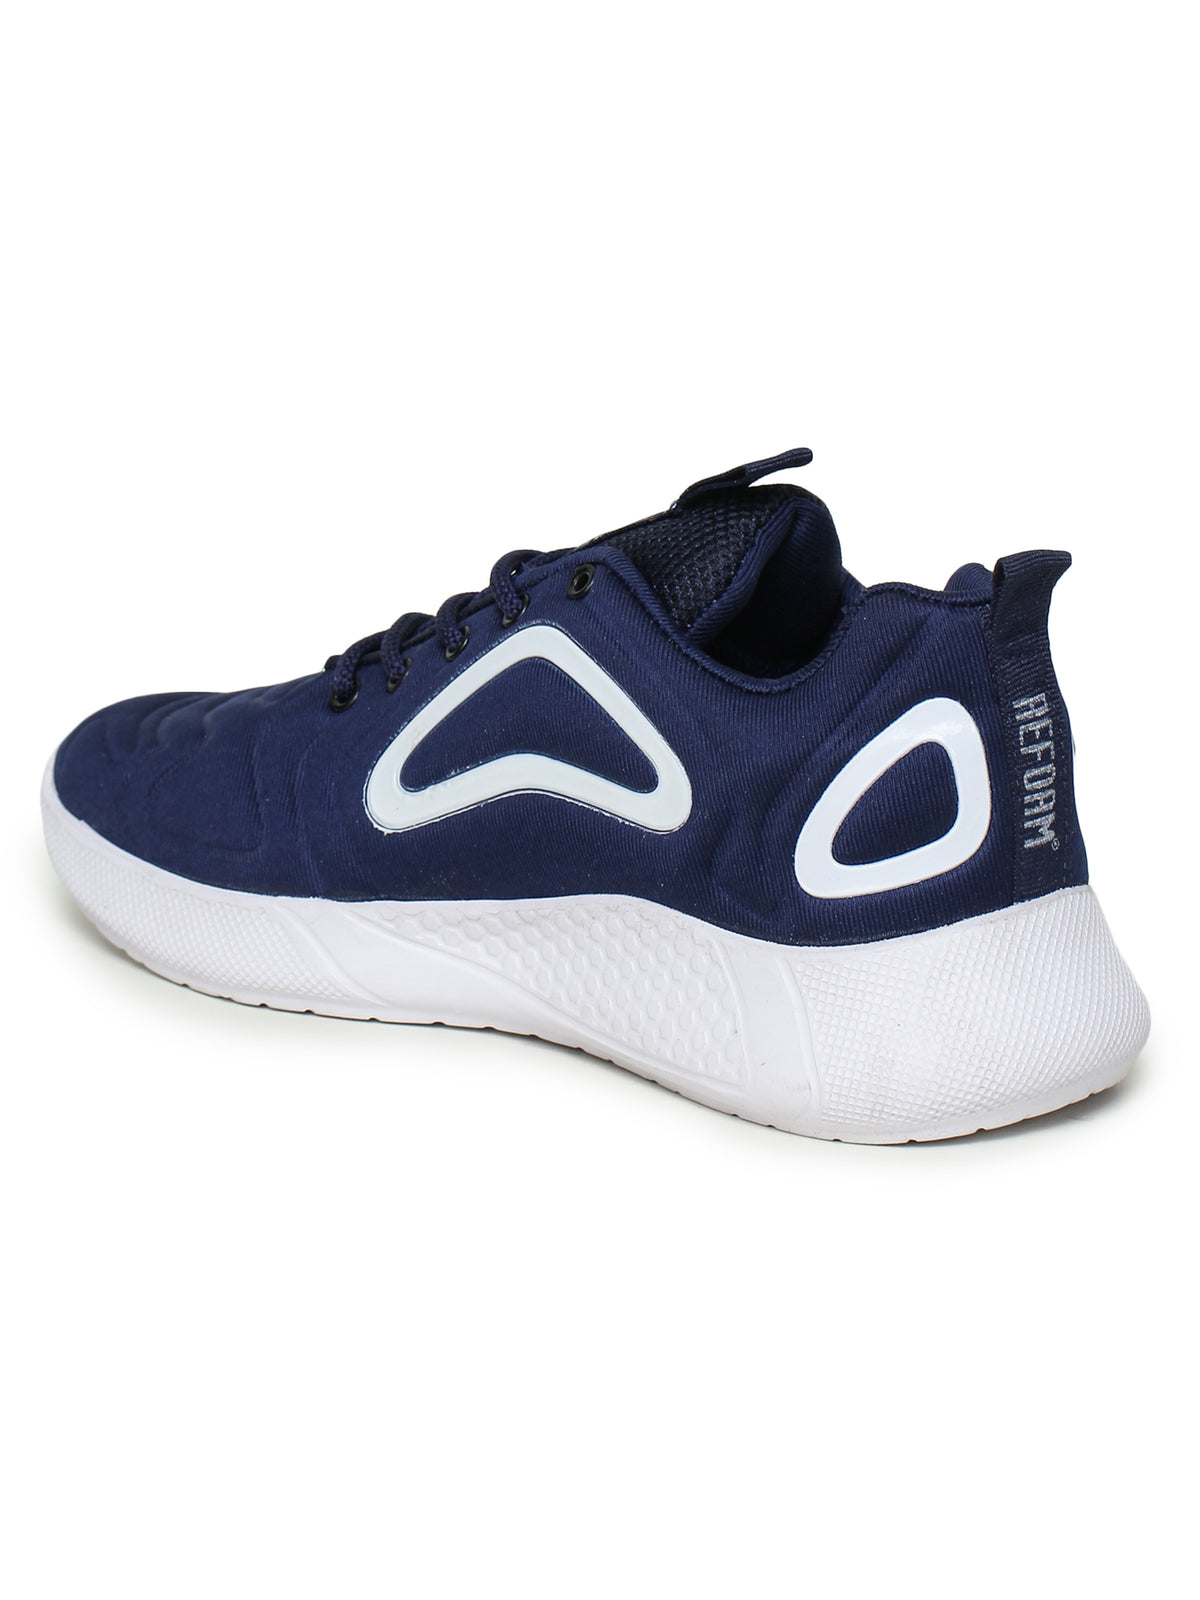 Navy Blue Solid Fabric Lace Up Running Sport Shoes For Men